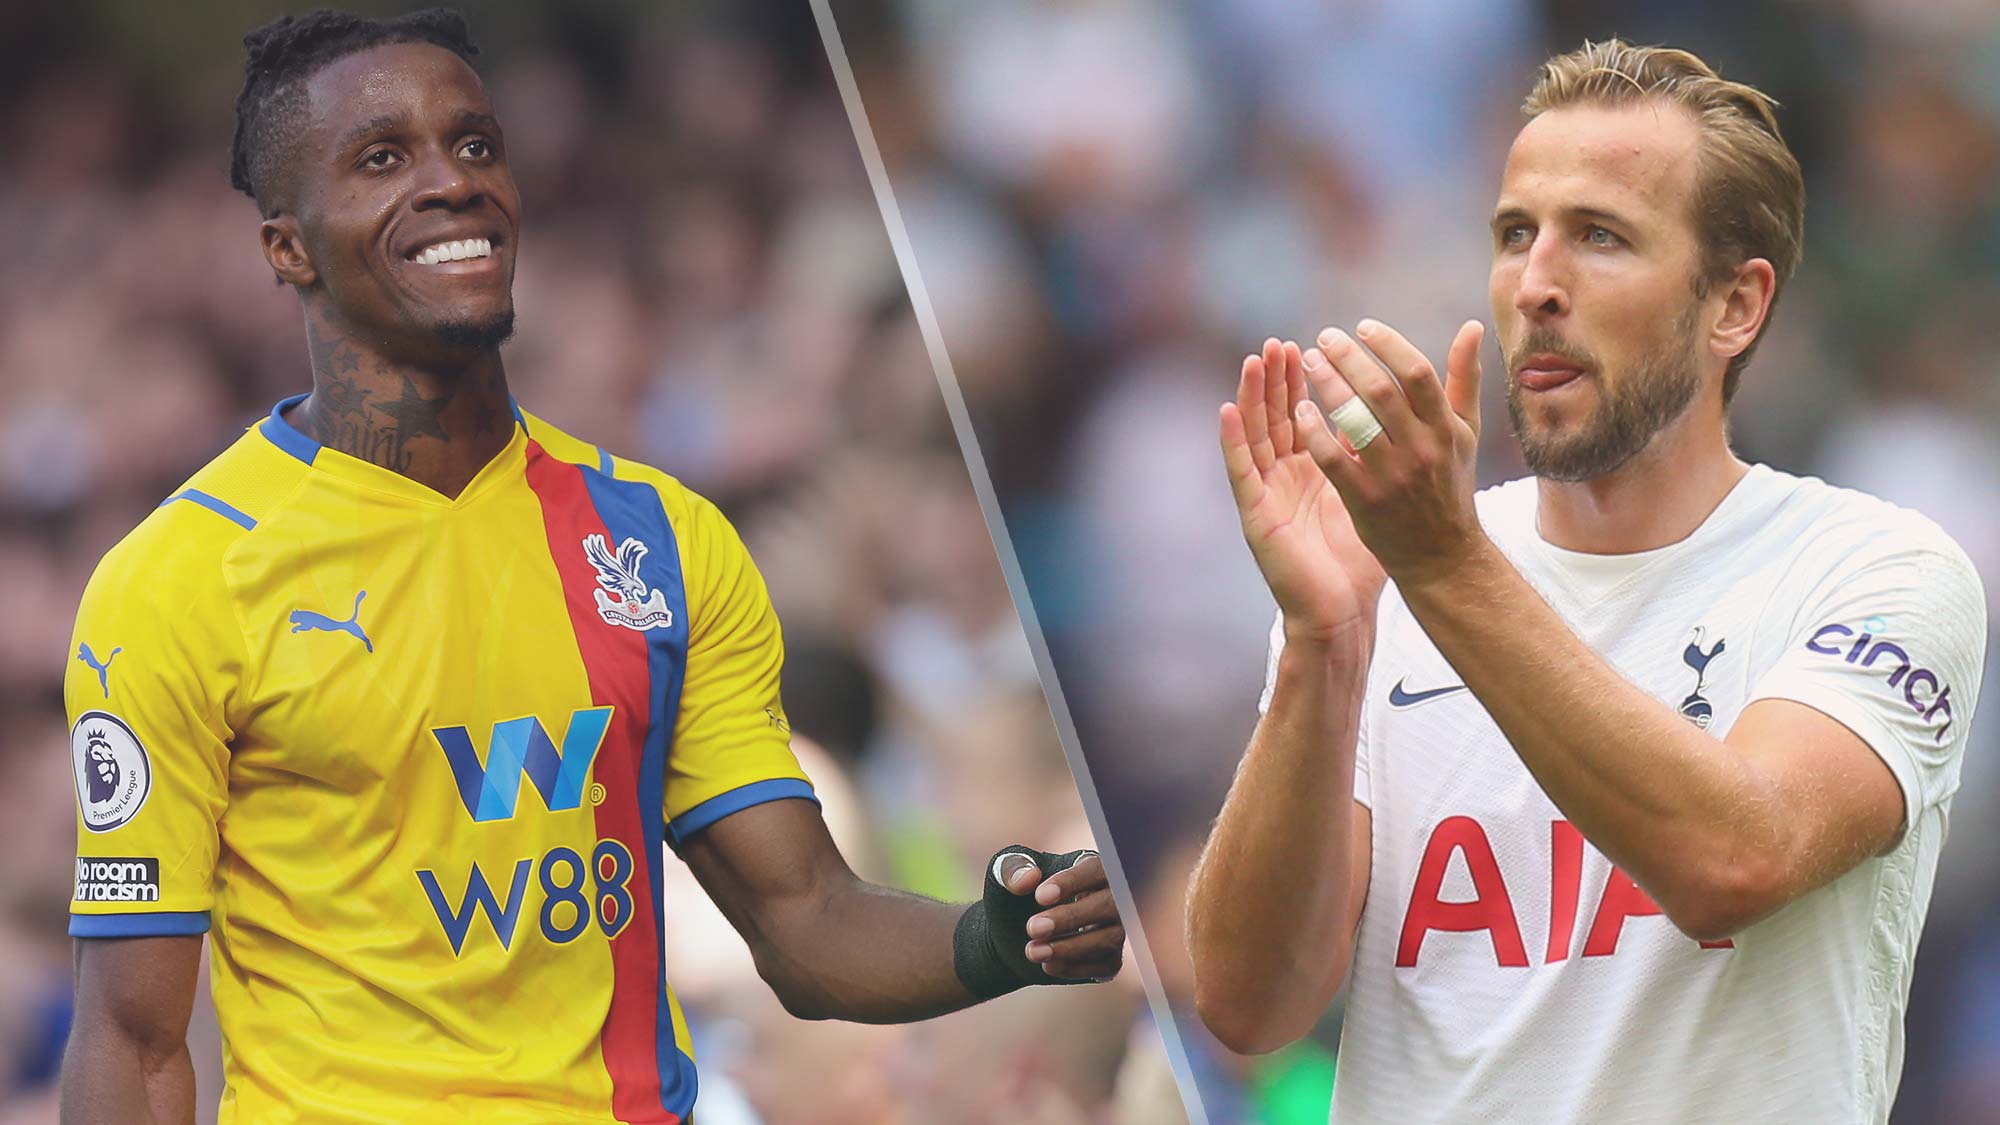 Tottenham Hotspur vs Crystal Palace: Tottenham Hotspur vs Crystal Palace  Premier League live streaming: When and where to watch - The Economic Times